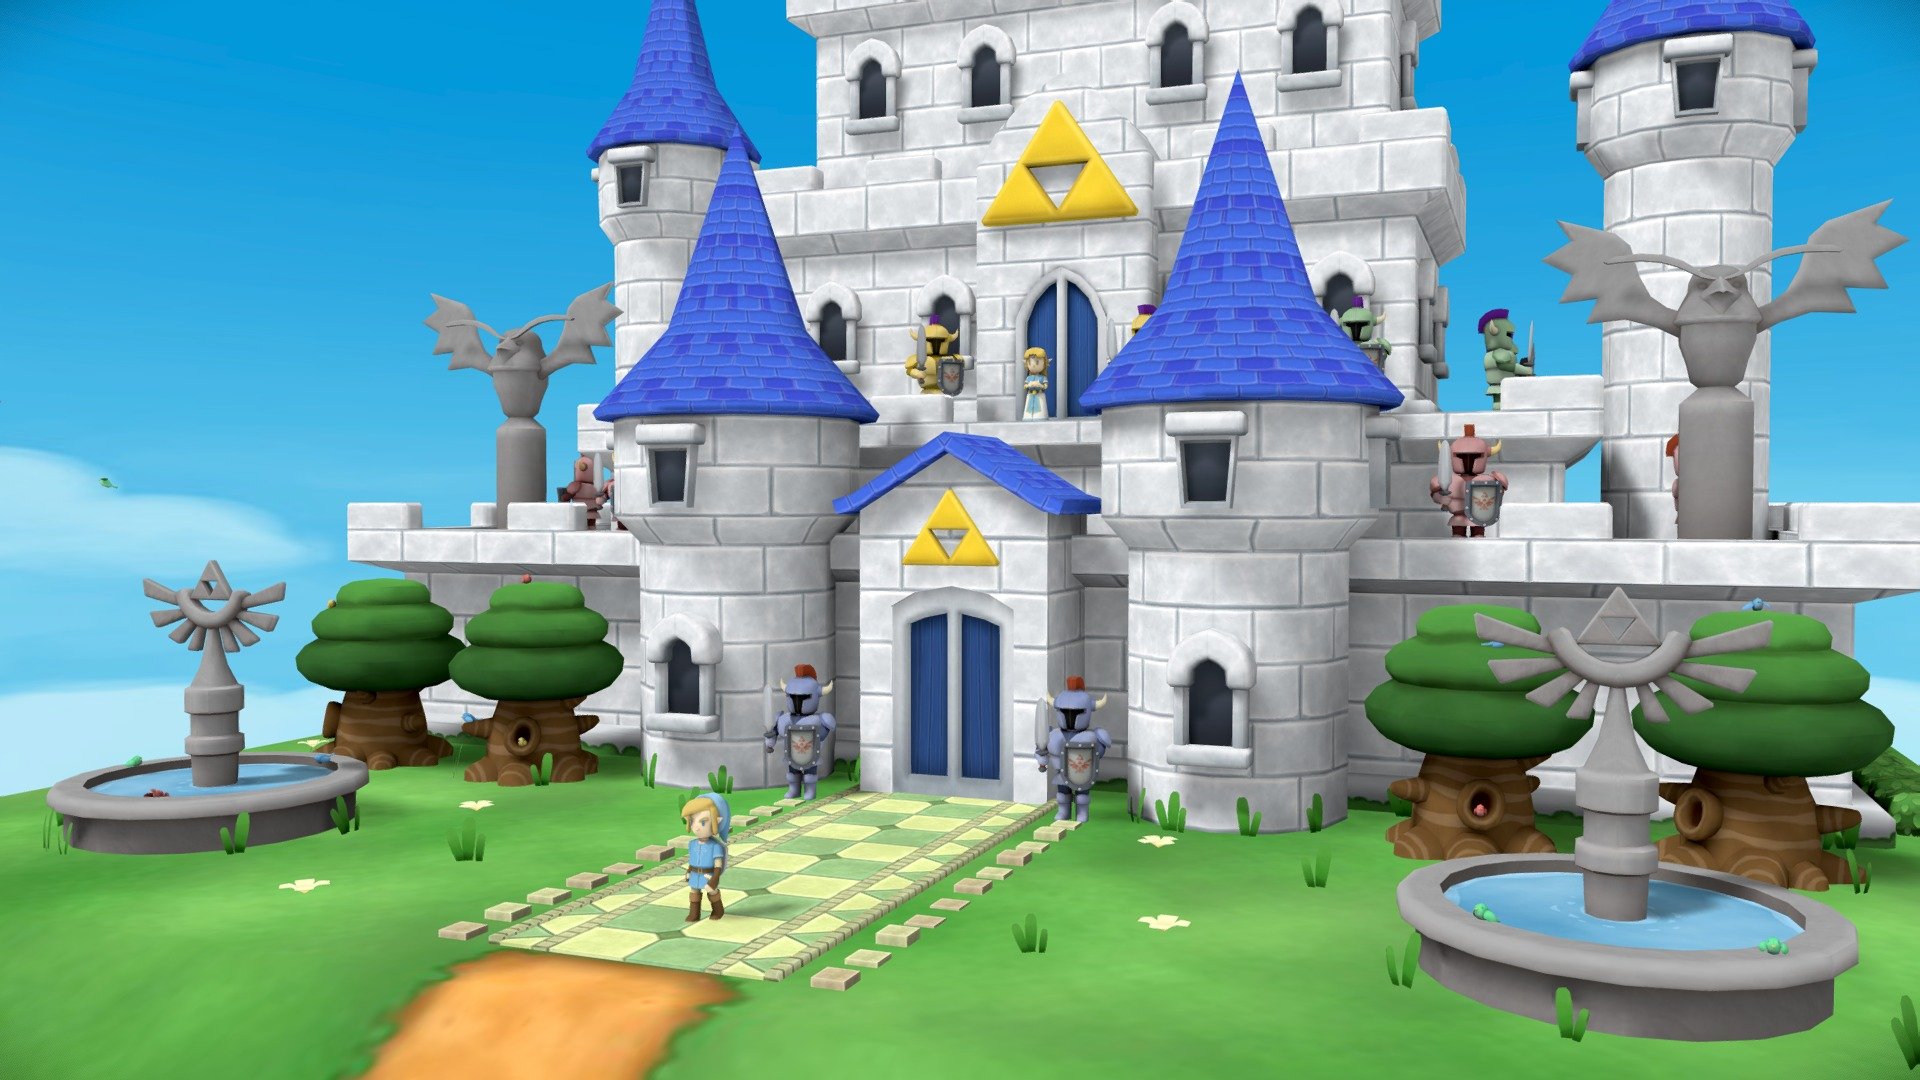 Simplistic diorama of Hyrule Castle from the Legend of Zelda, just for fun.
I took inspiration from both Breath of the Wild (theme) and A Link to the Past/A Link Between Worlds (art style).




Modelled in Maya.

Textured in Photoshop.

Some Sculpting in Zbrush.

Light Baked in Unity.
 - A Link to the Wild - Hyrule Castle - 3D model by Chris_Mendo 3d model